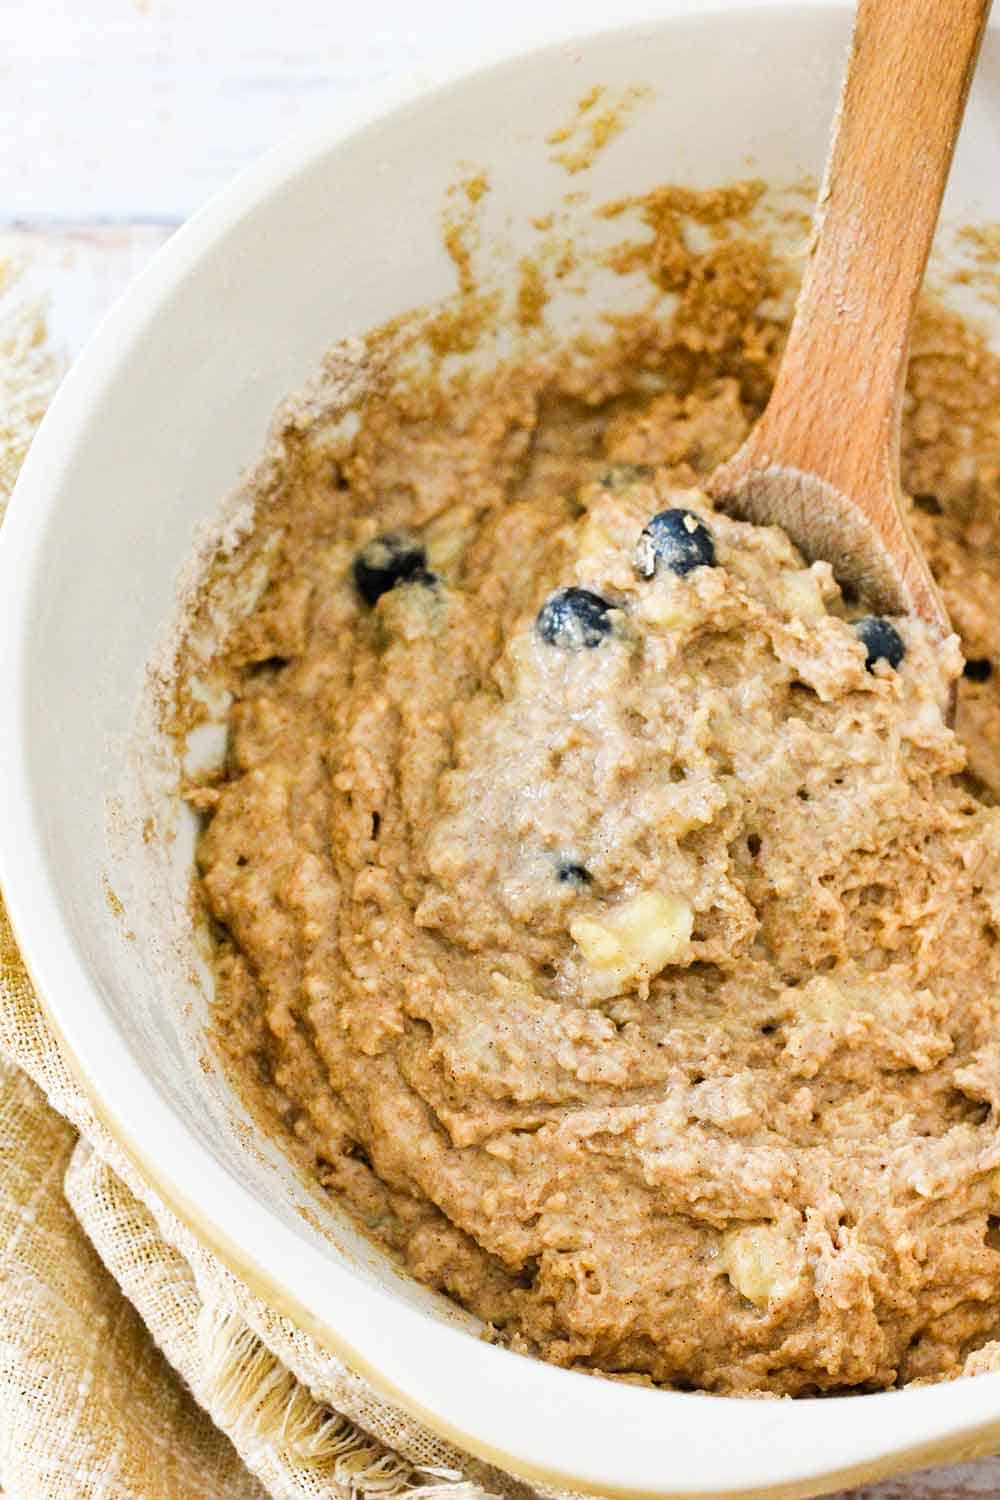 Mix the banana blueberry muffin batter in a large bowl with a wooden spoon. 